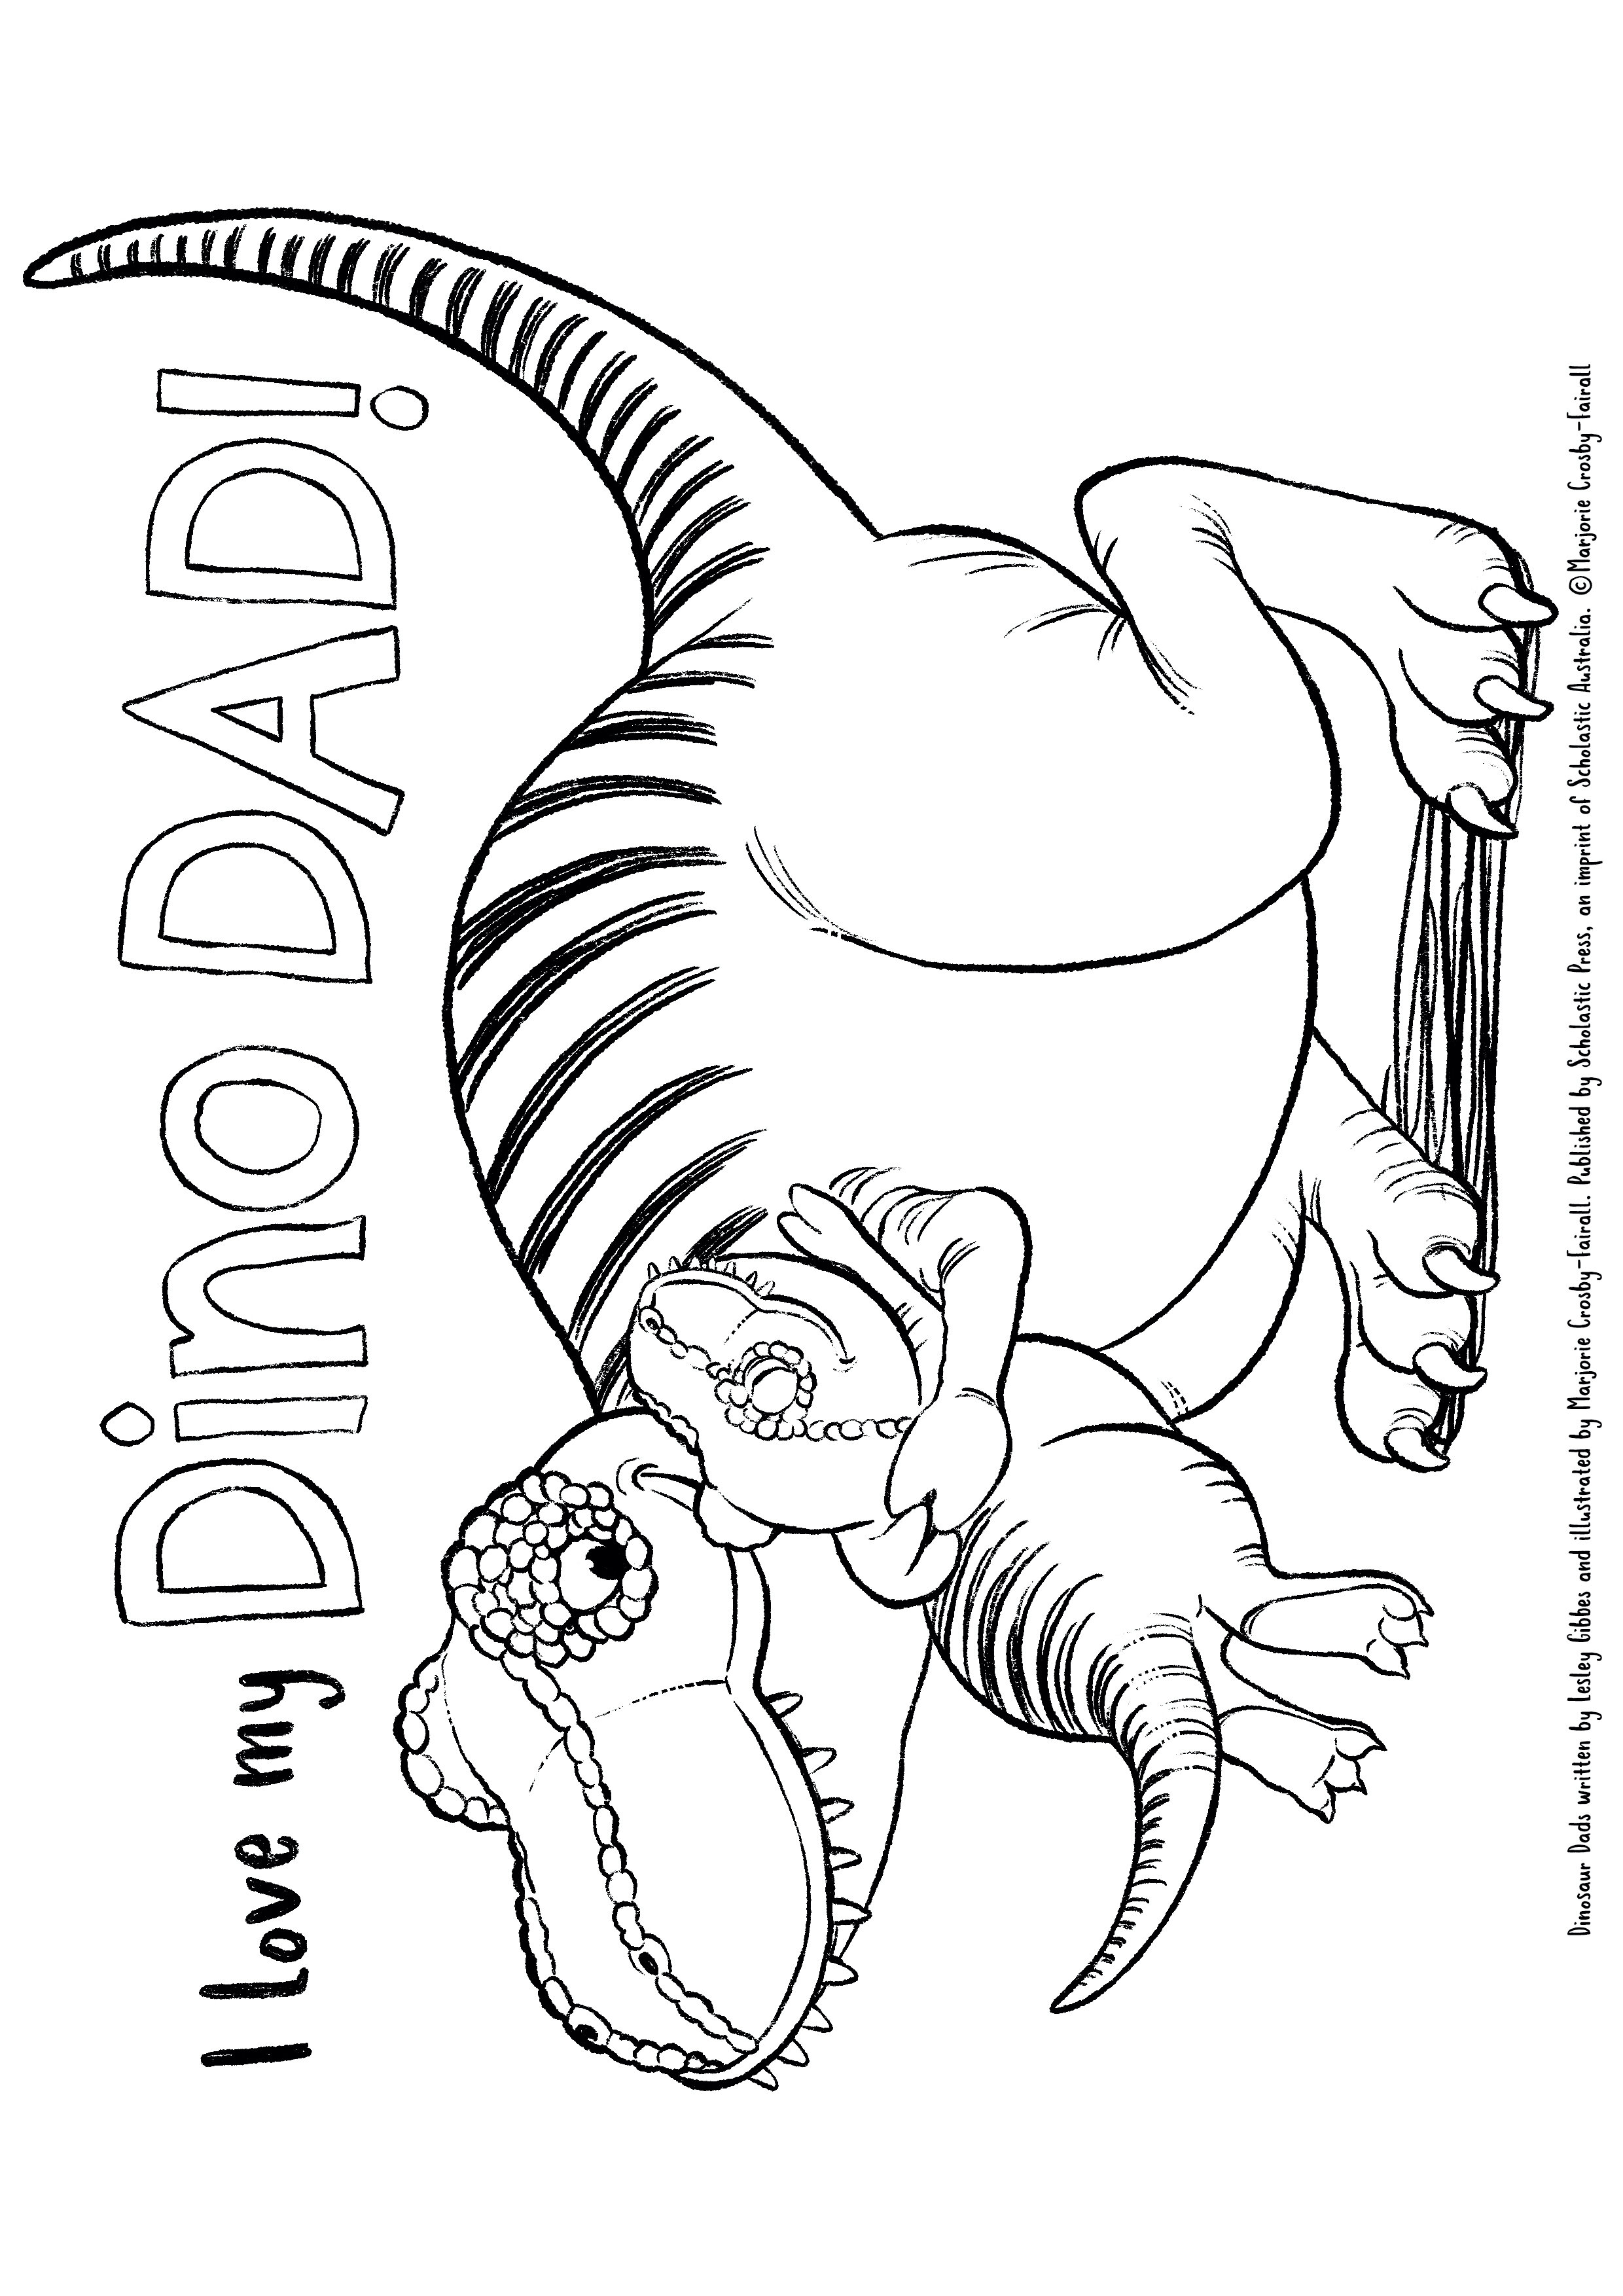 I love my dino dad fathers day drawing activities â marjorie crosby